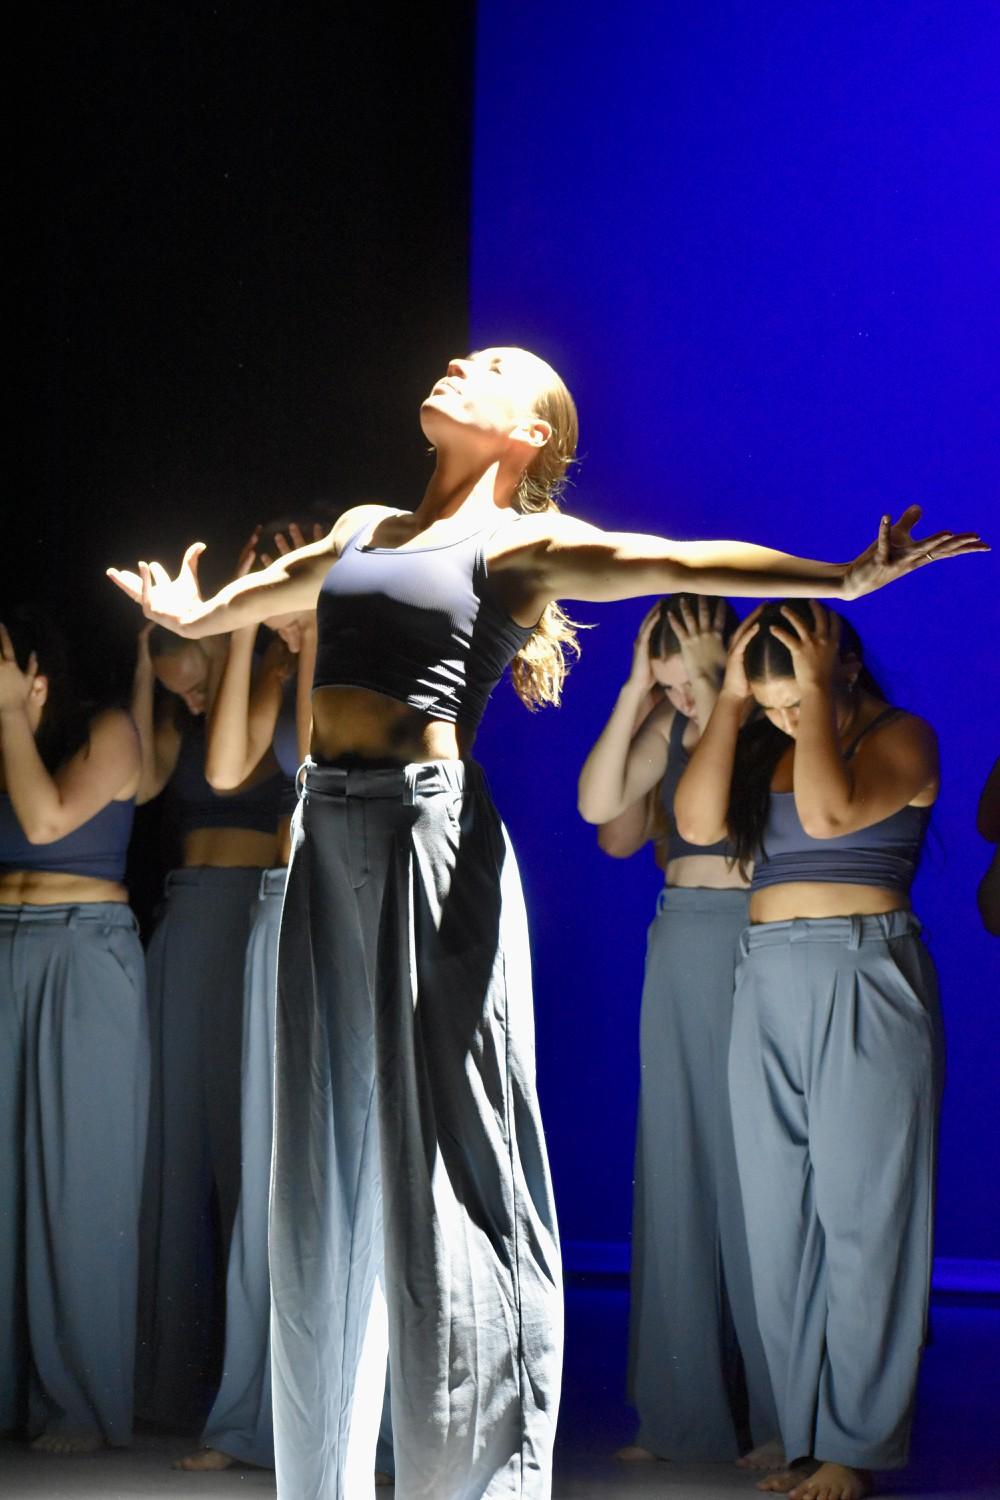 Dancer Belle Mason closed out the opening routine with a powerful stance in the middle of the stage. The theme "Wonder" represented the deepness of thoughts and the power in breaking free from thoughts, students said. Photo courtesy of Mary Elisabeth